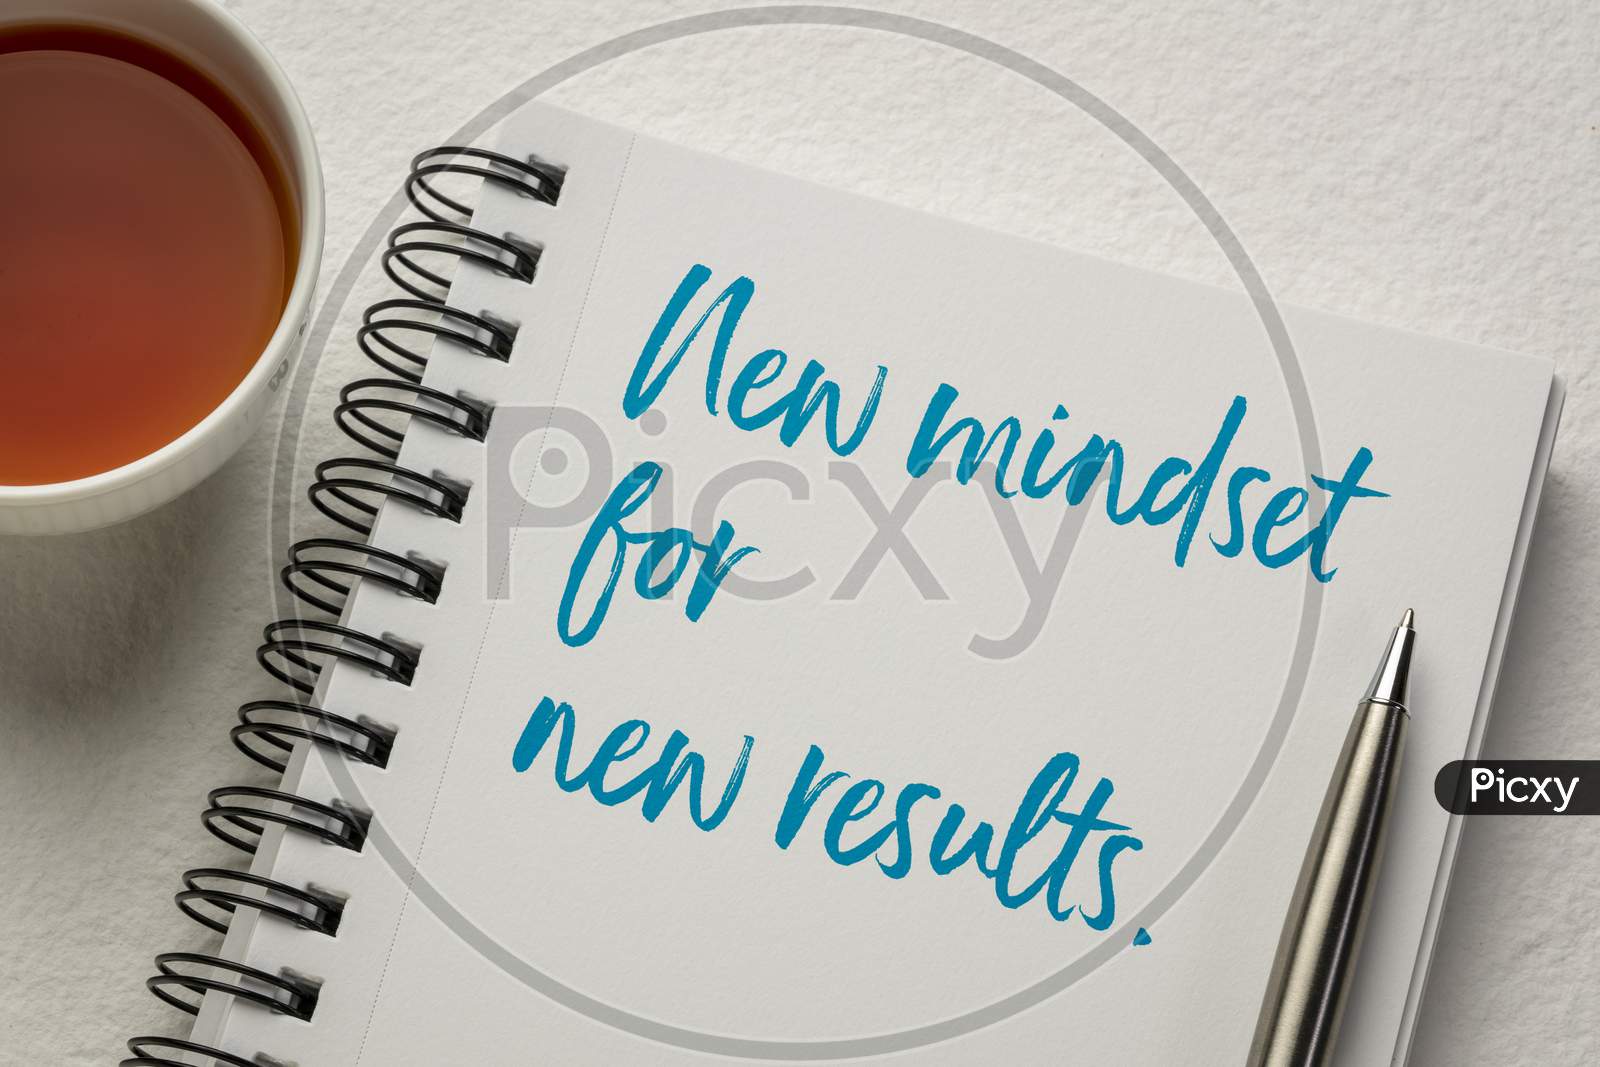 New Mindset And New Results Concept - Handwriting In A Sketchbook With A Cup Of Tea. Business, Creativity And Personal Development.